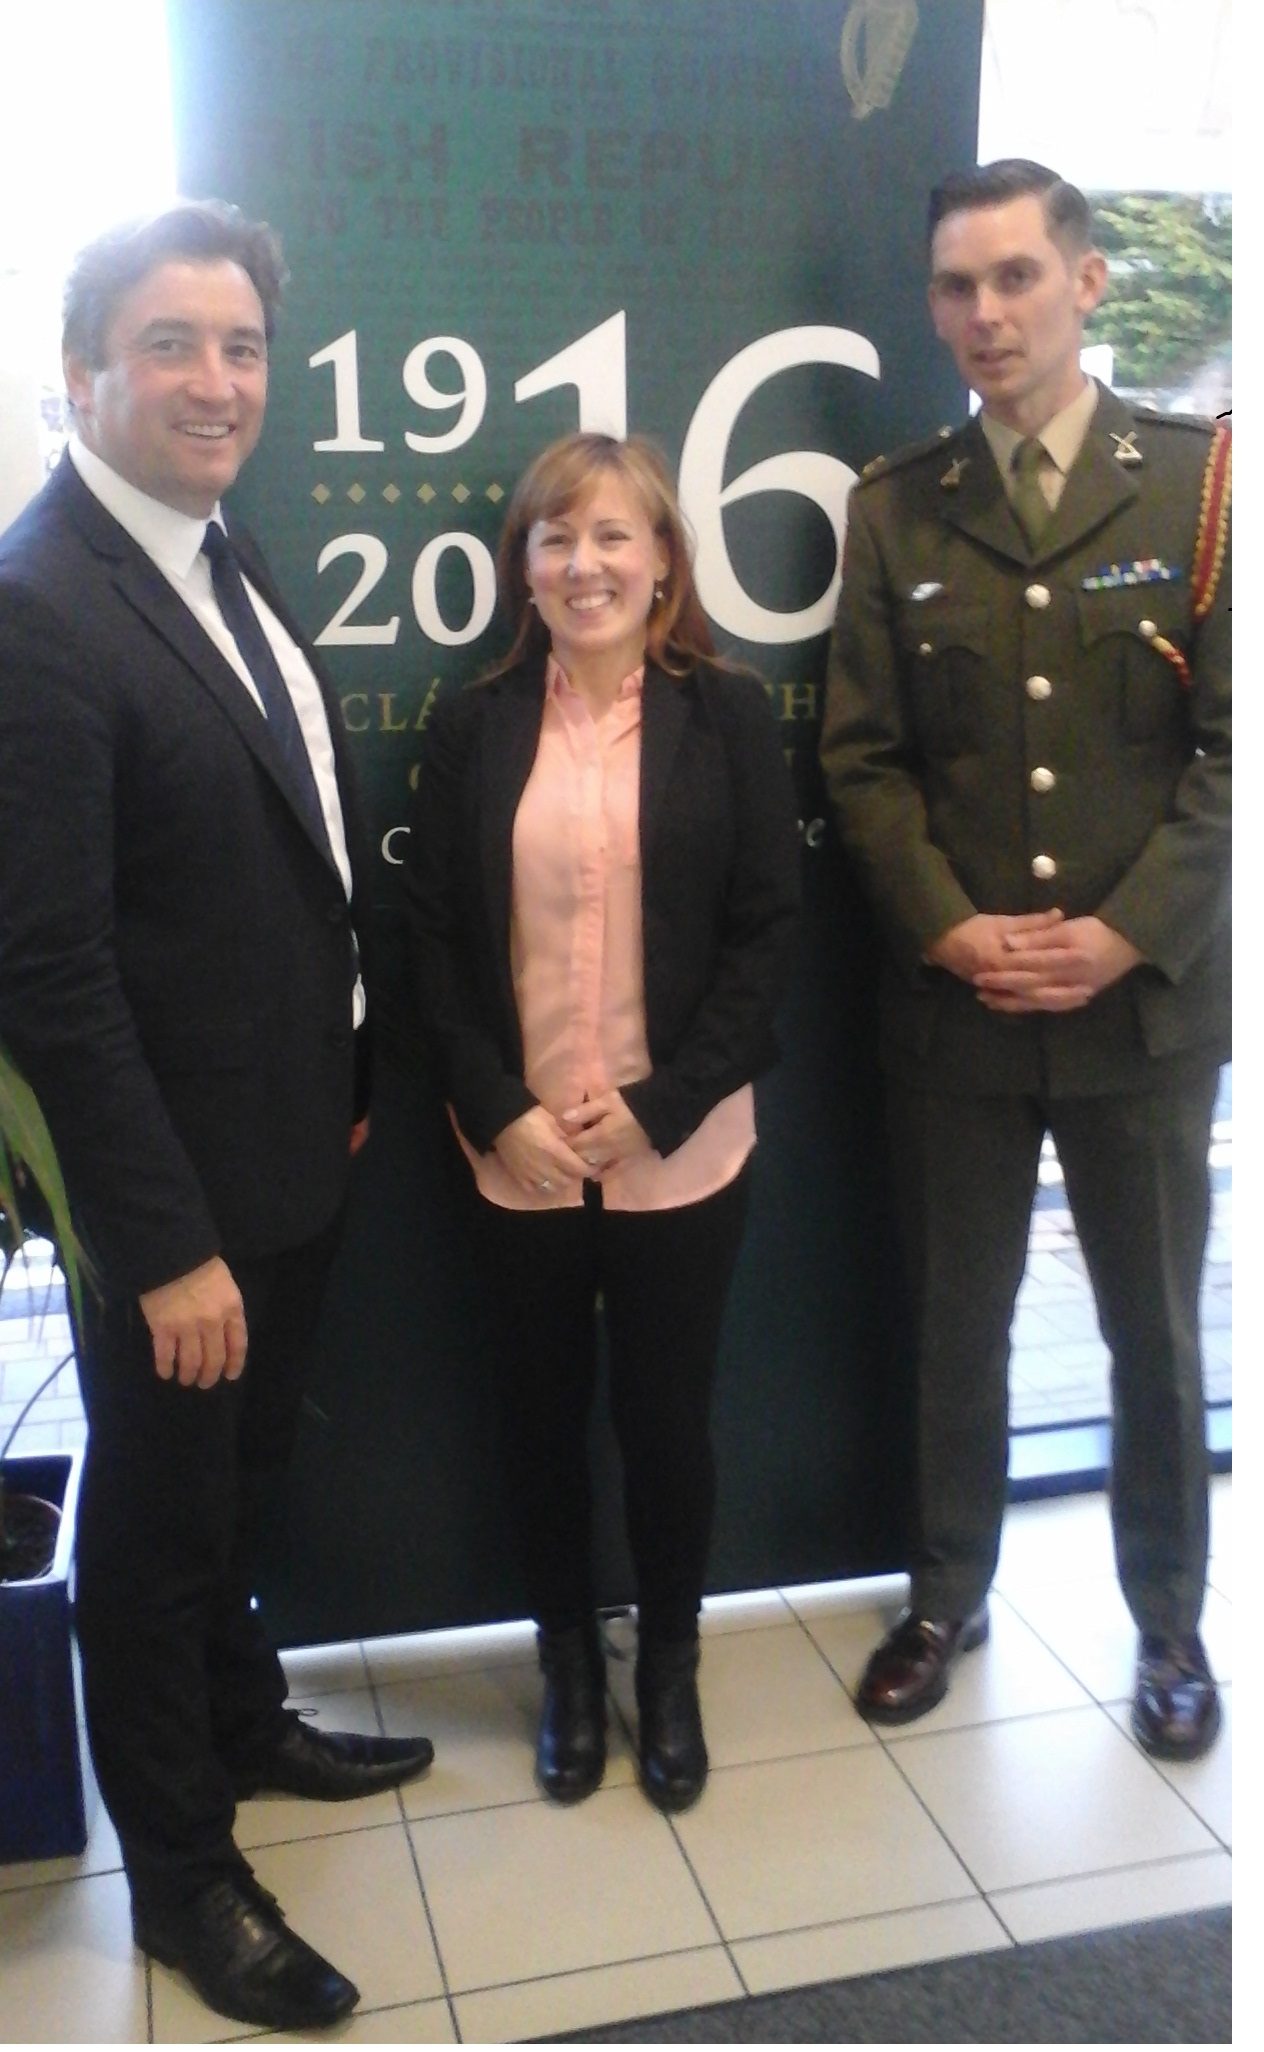 Cllr. Liona O'Toole at SDCC 1916 Commemoration workshop in Lucan Library